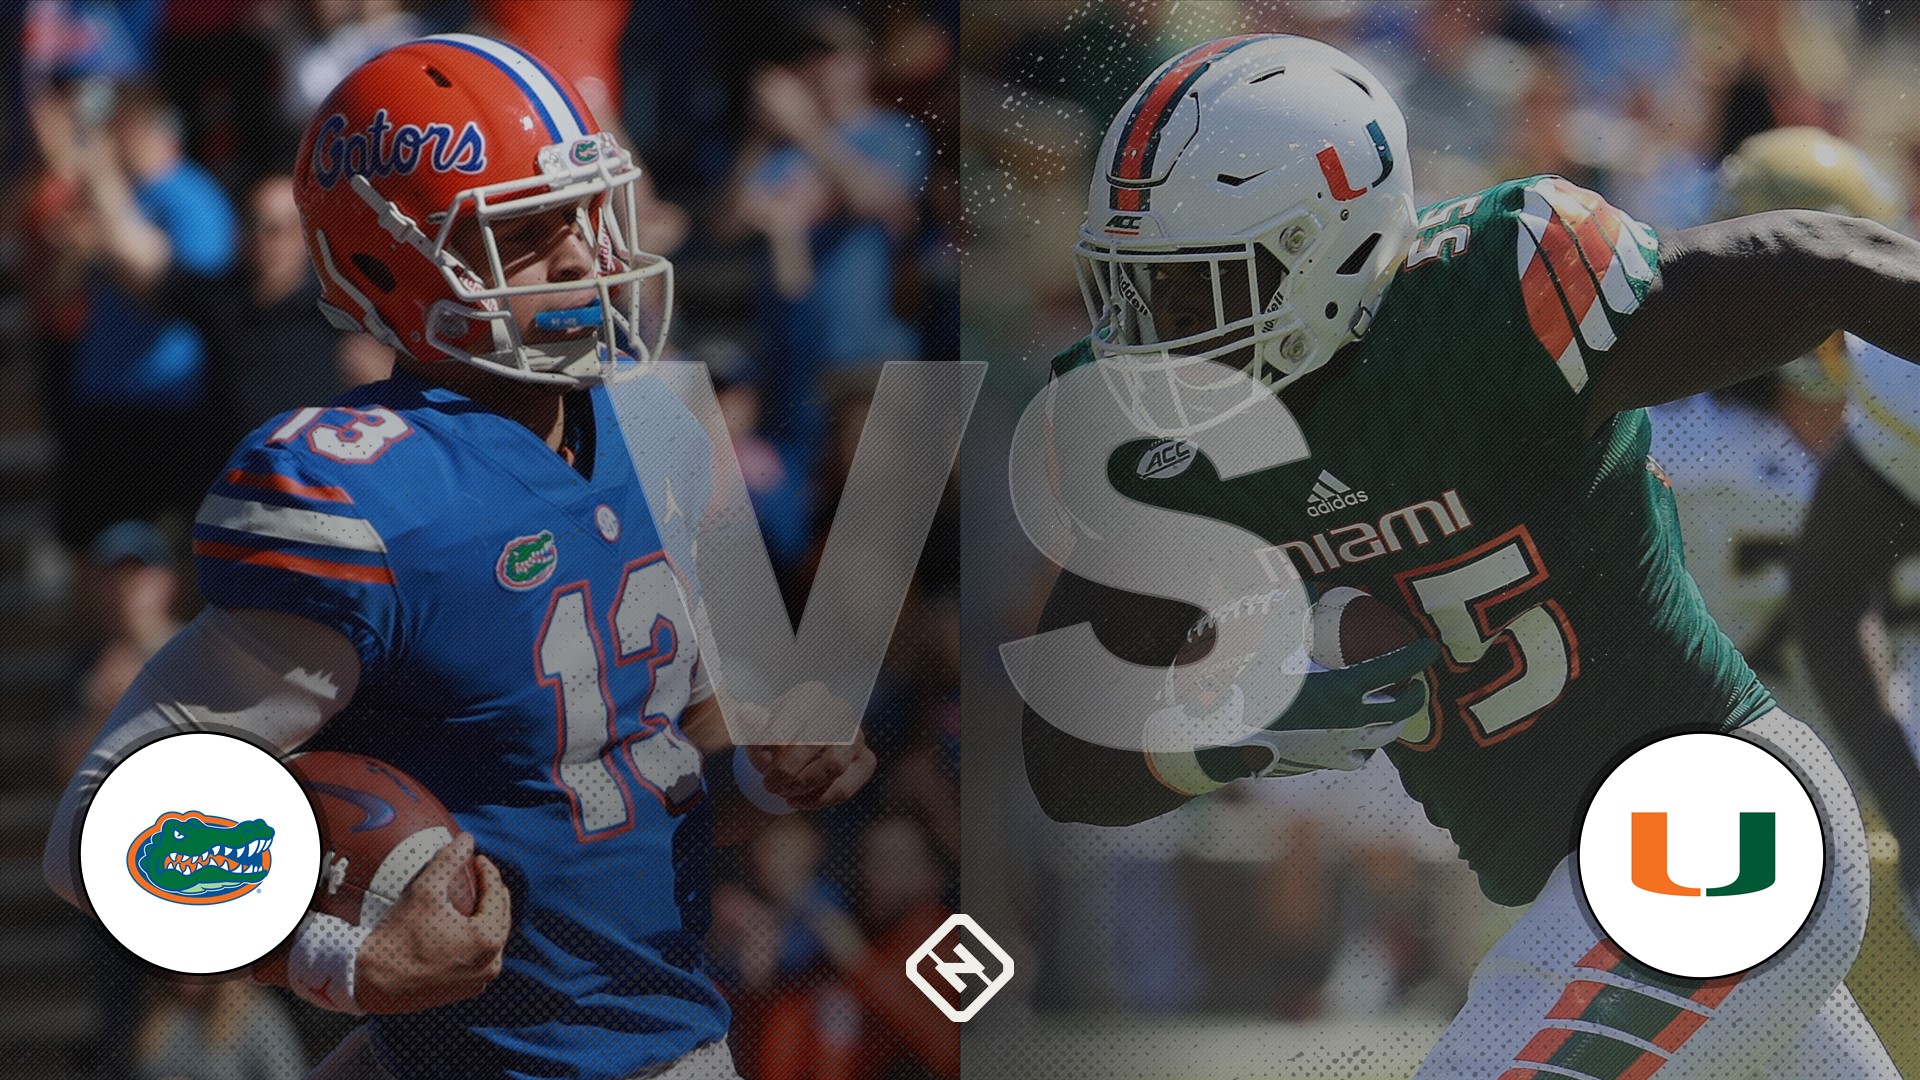 Miami vs. Florida Live score, updates, highlights from 2019 college